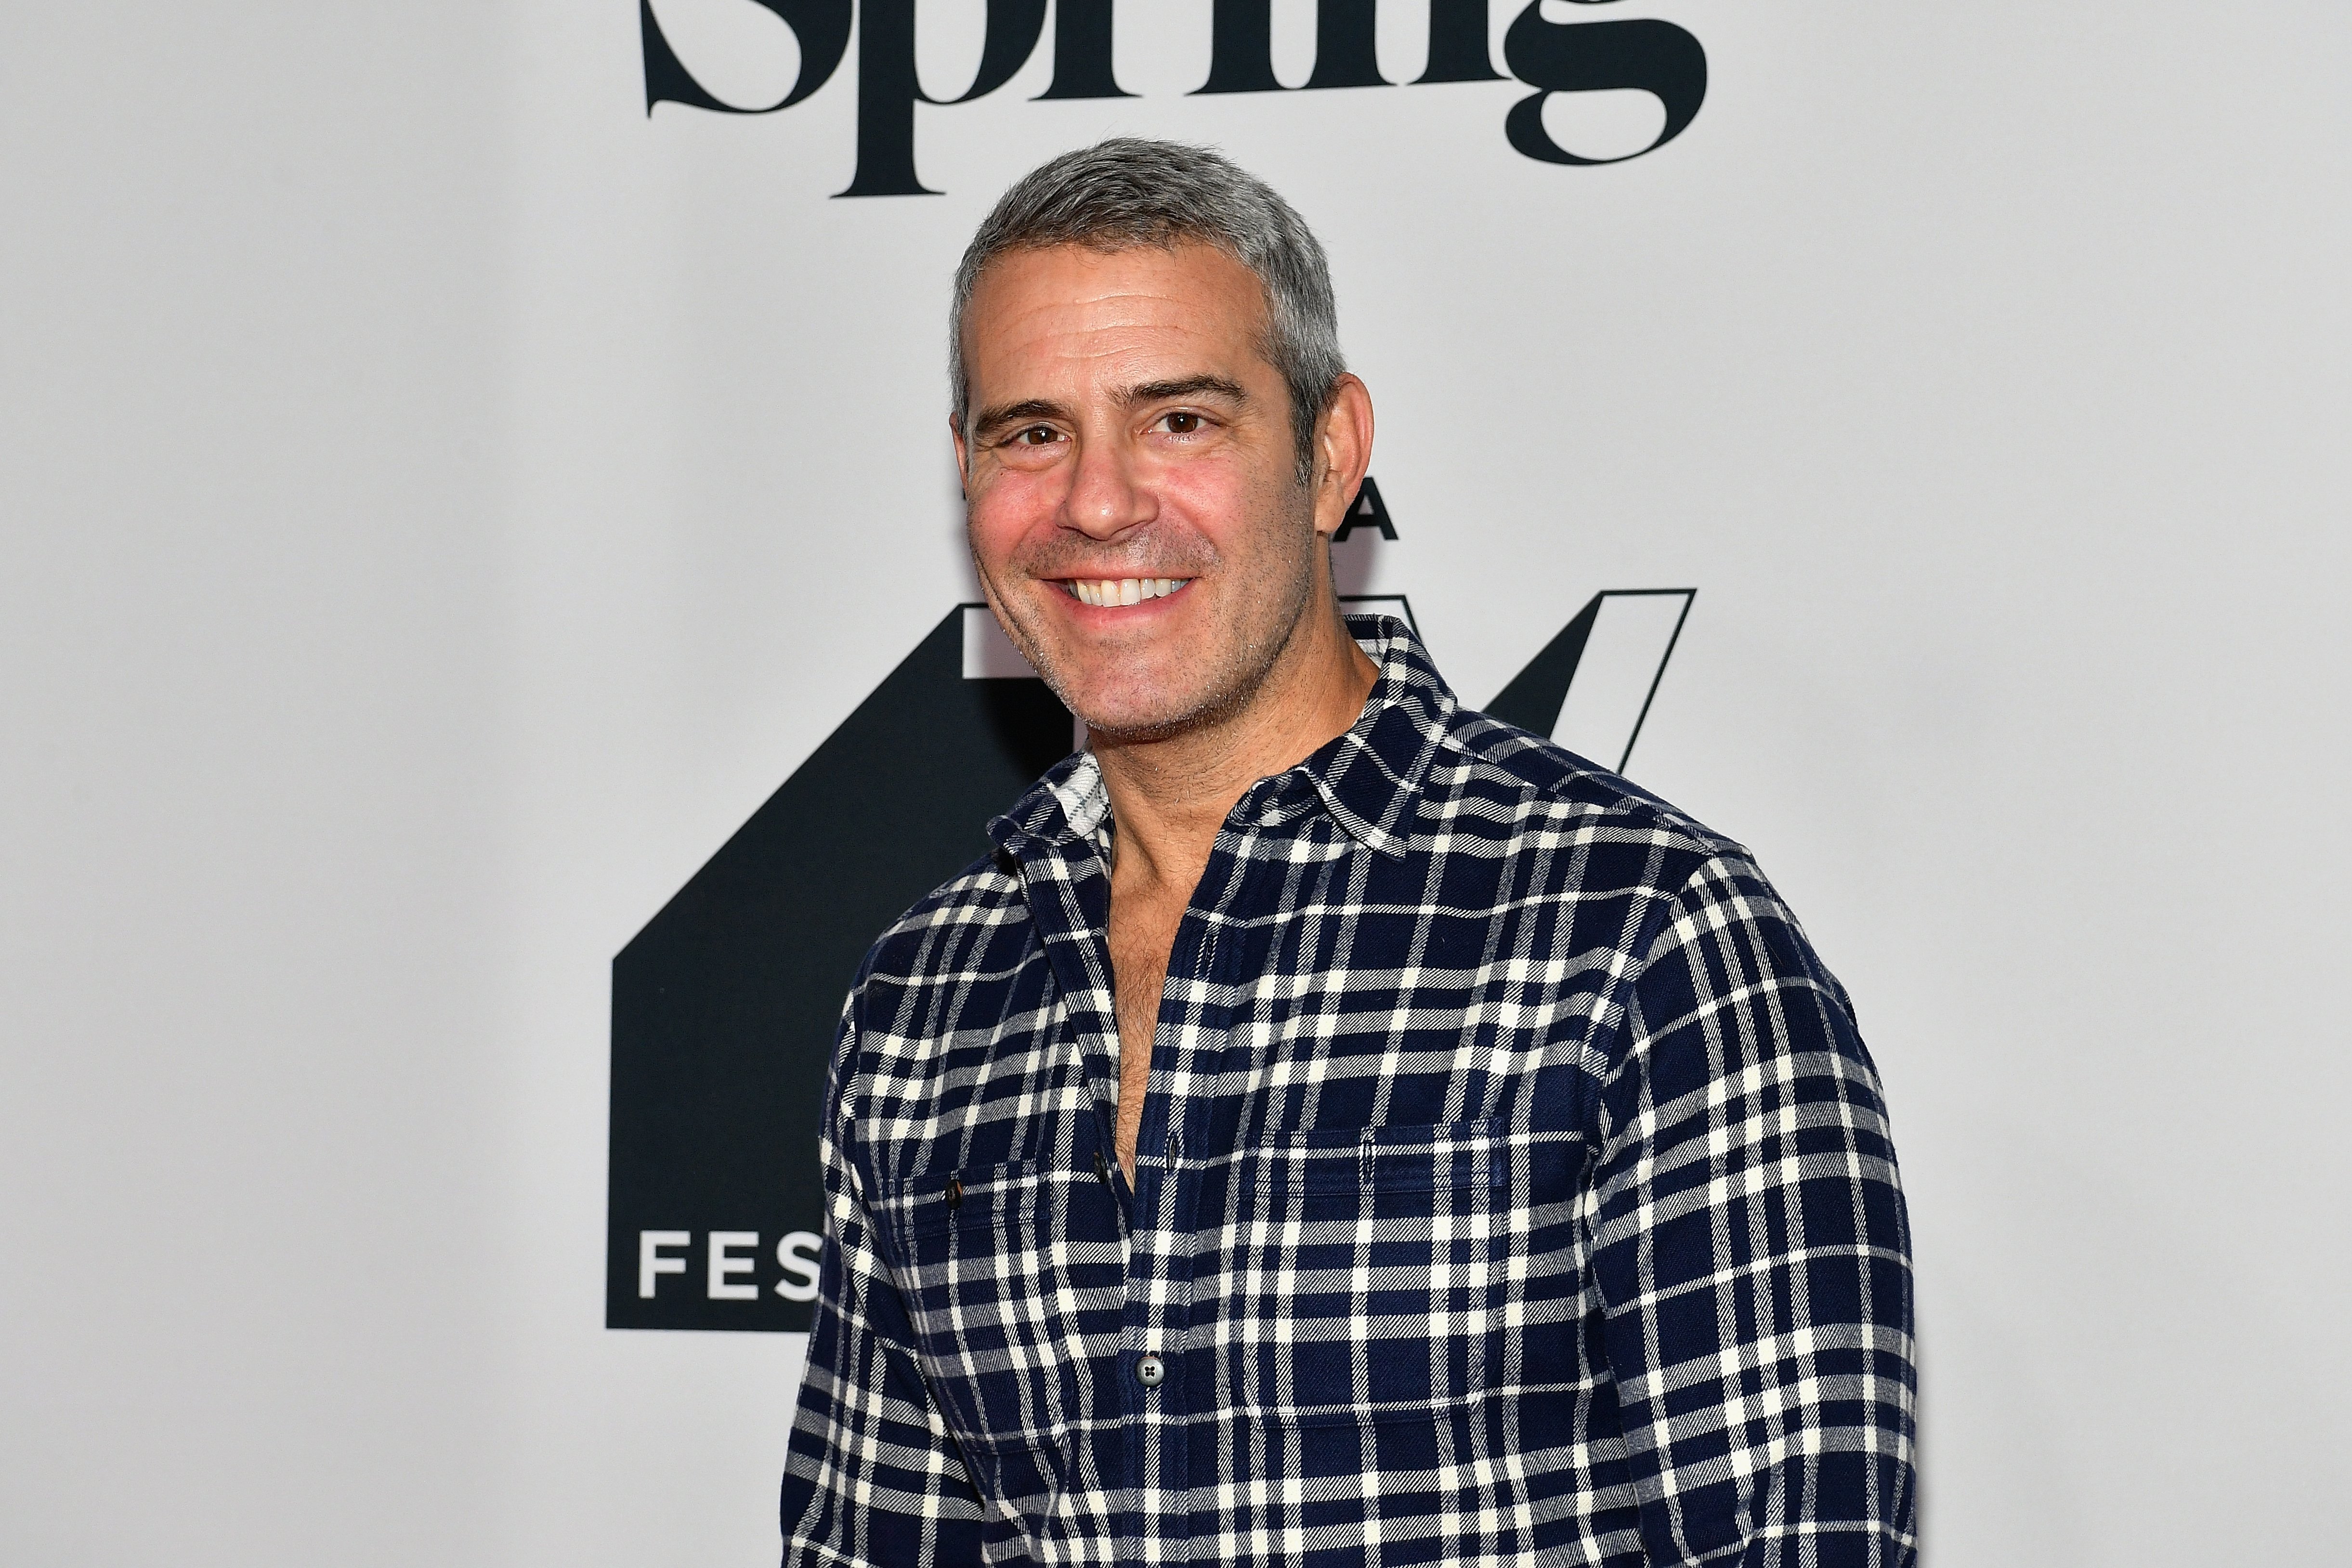 Andy Cohen at the 2018 Tribeca TV Festival on September 23, 2018. | Source: Getty Images